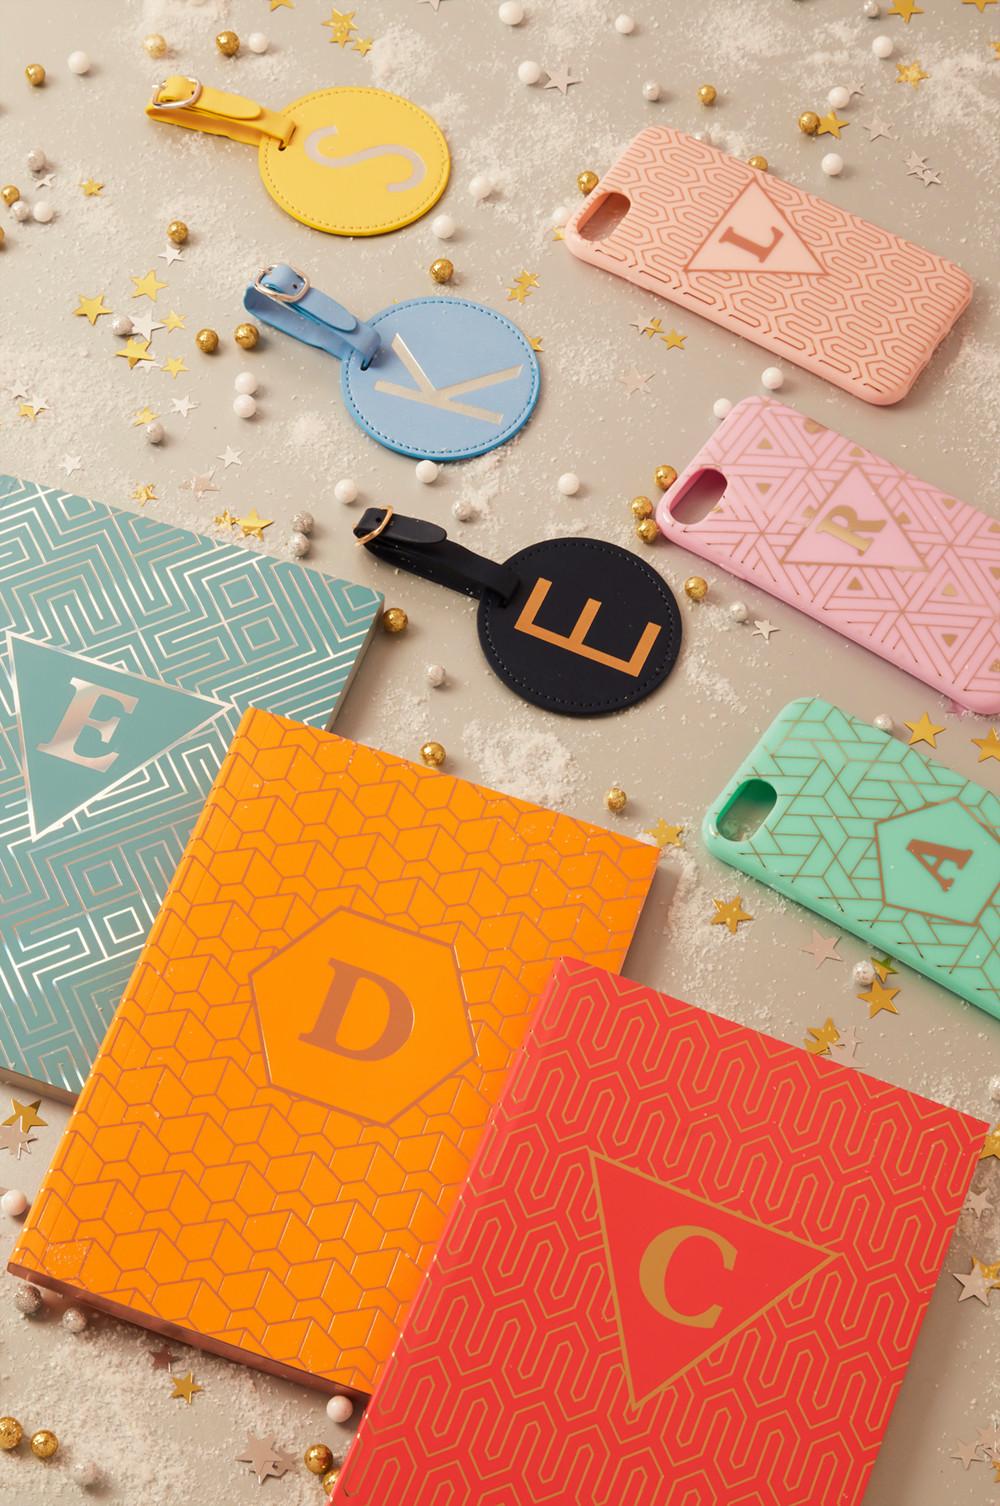 Primark's personalised initial notebook and accessories